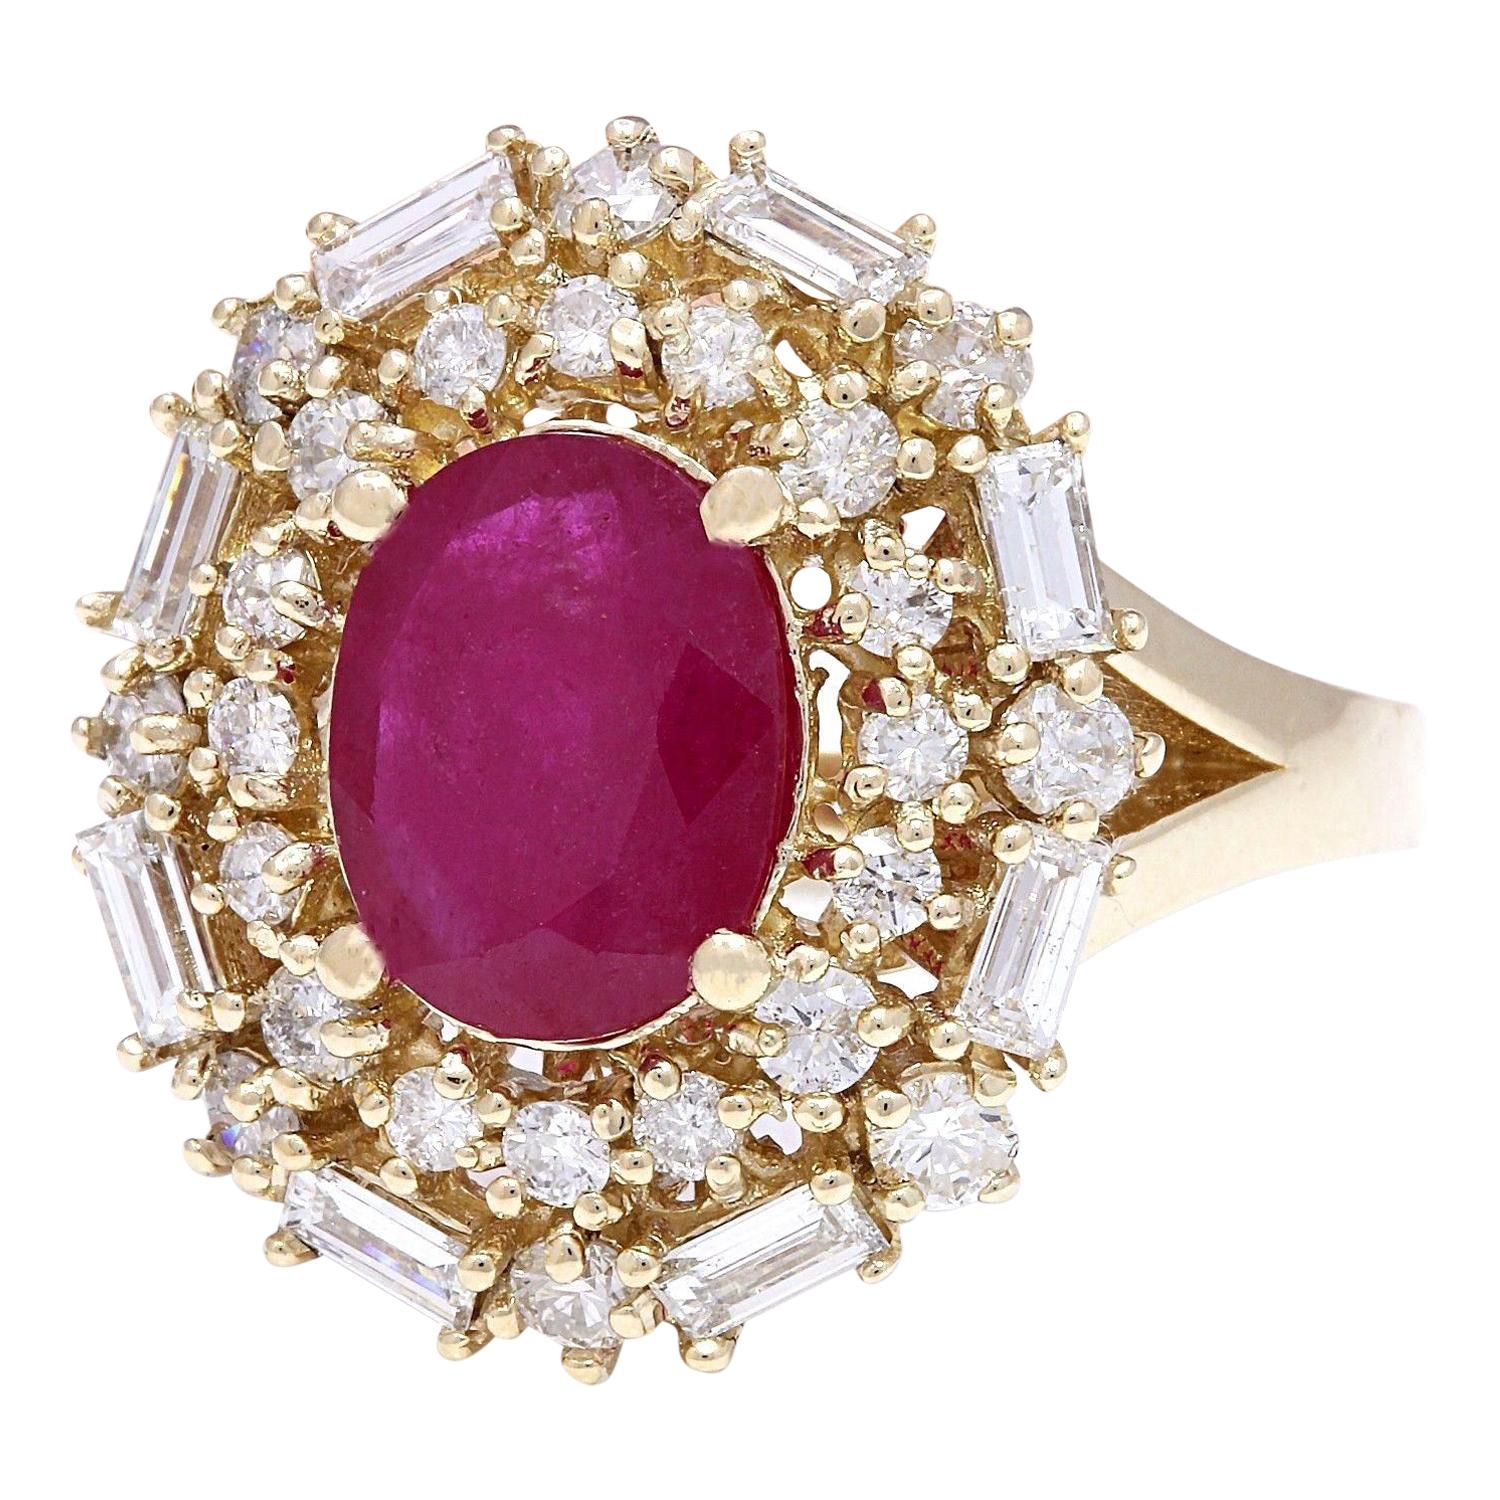 3.38 Carat Natural Ruby 14K Solid Yellow Gold Diamond Ring
 Item Type: Ring
 Item Style: Engagement
 Material: 14K Yellow Gold
 Mainstone: Ruby
 Stone Color: Red
 Stone Weight: 2.10 Carat
 Stone Shape: Oval
 Stone Quantity: 1
 Stone Dimensions: